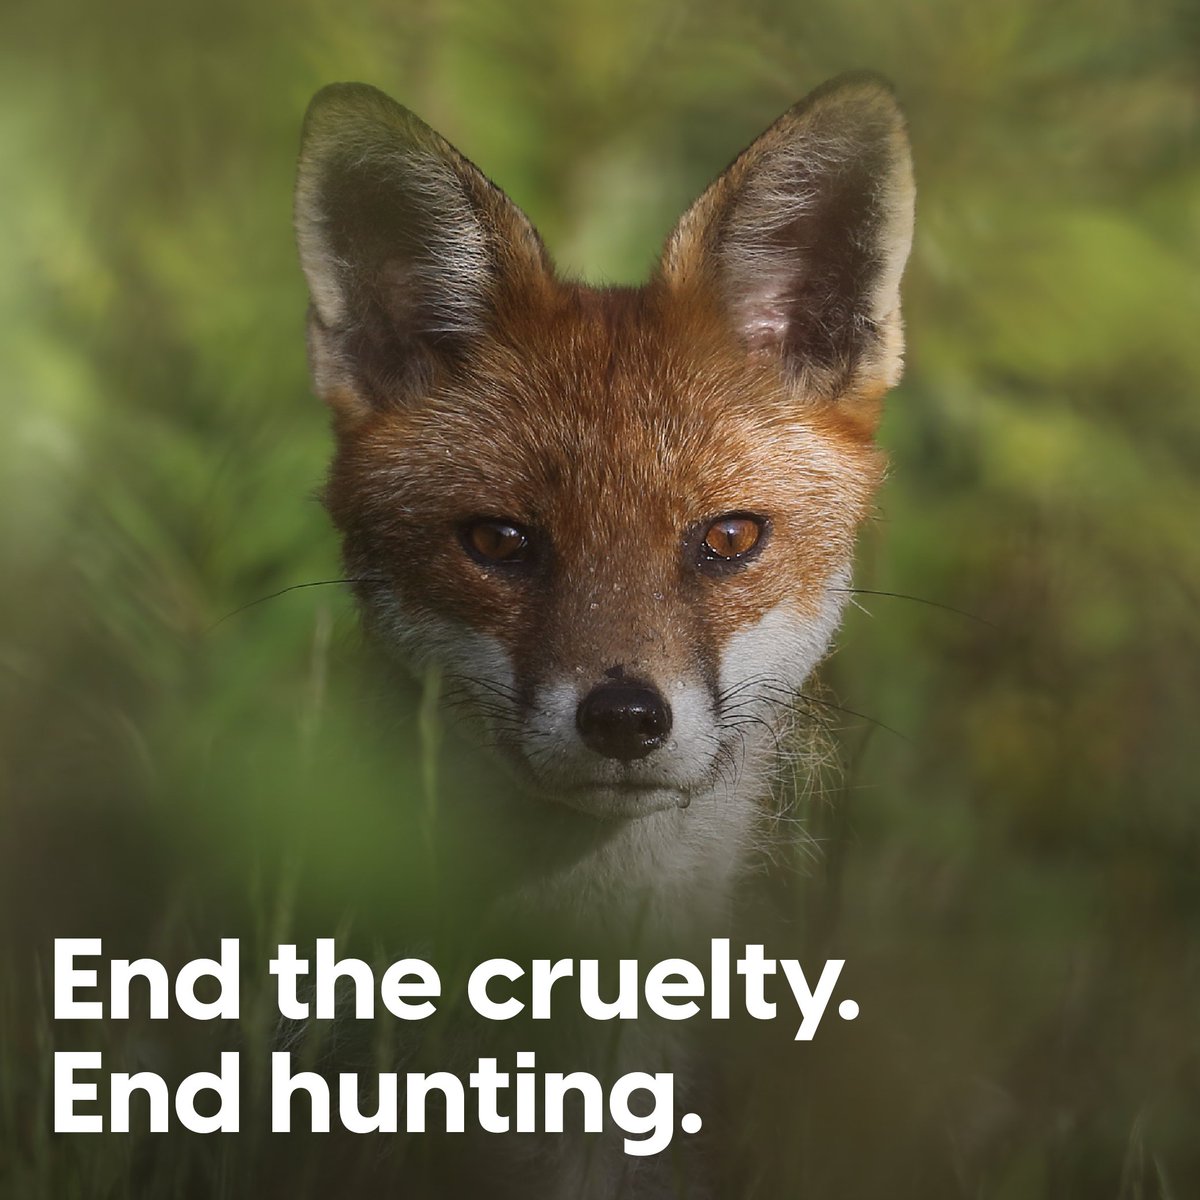 Sign our petition calling for a proper ban on all hunting with hounds⬇️ 

protectthewild.org.uk/our-campaigns/…